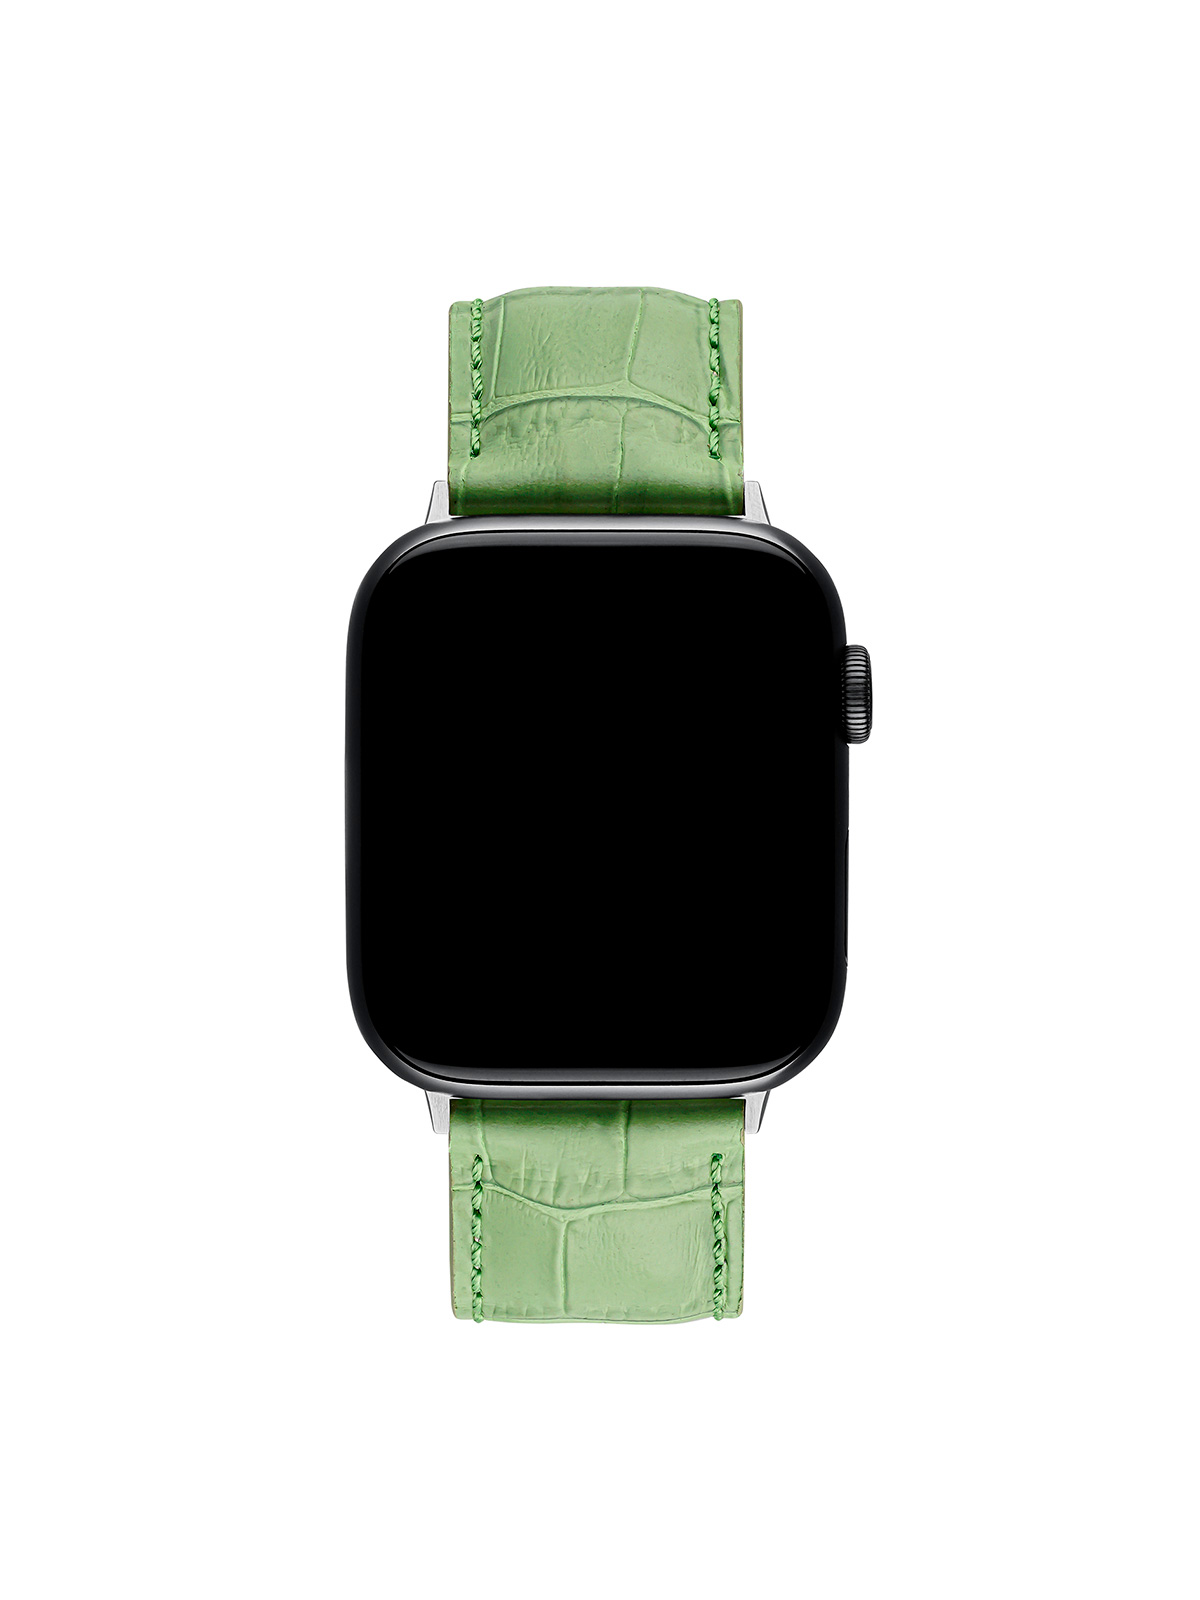 Green leather strap with crocodile finish for Apple Watch.